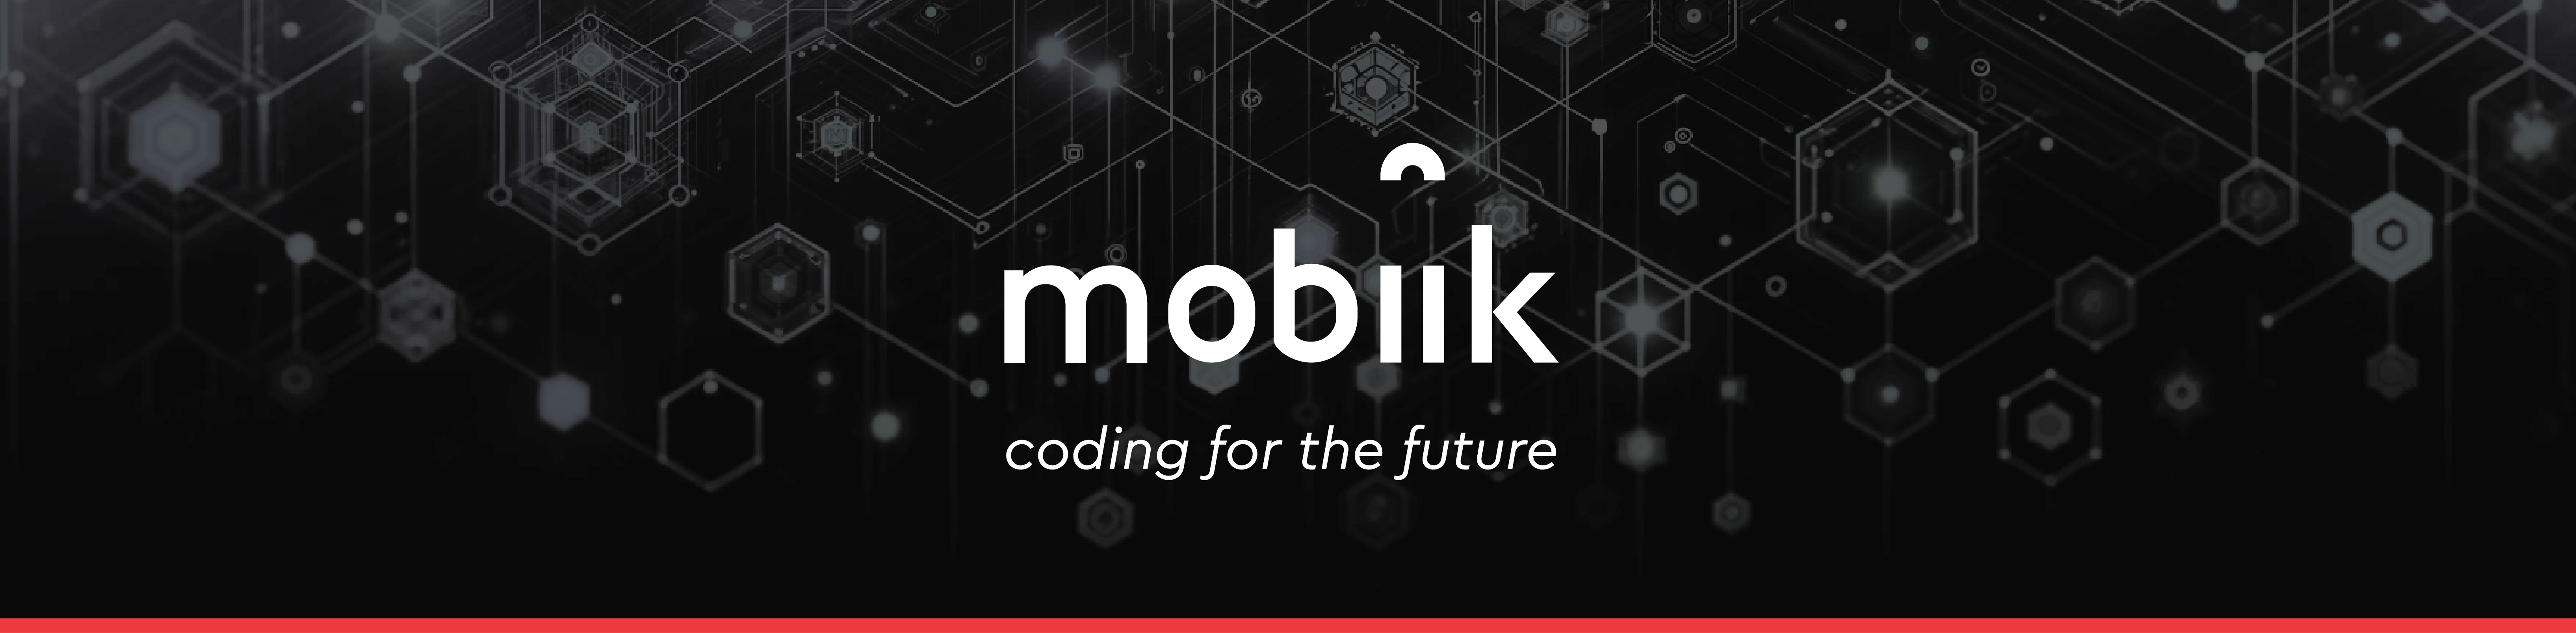 Mobiik - Getting companies ready for the future